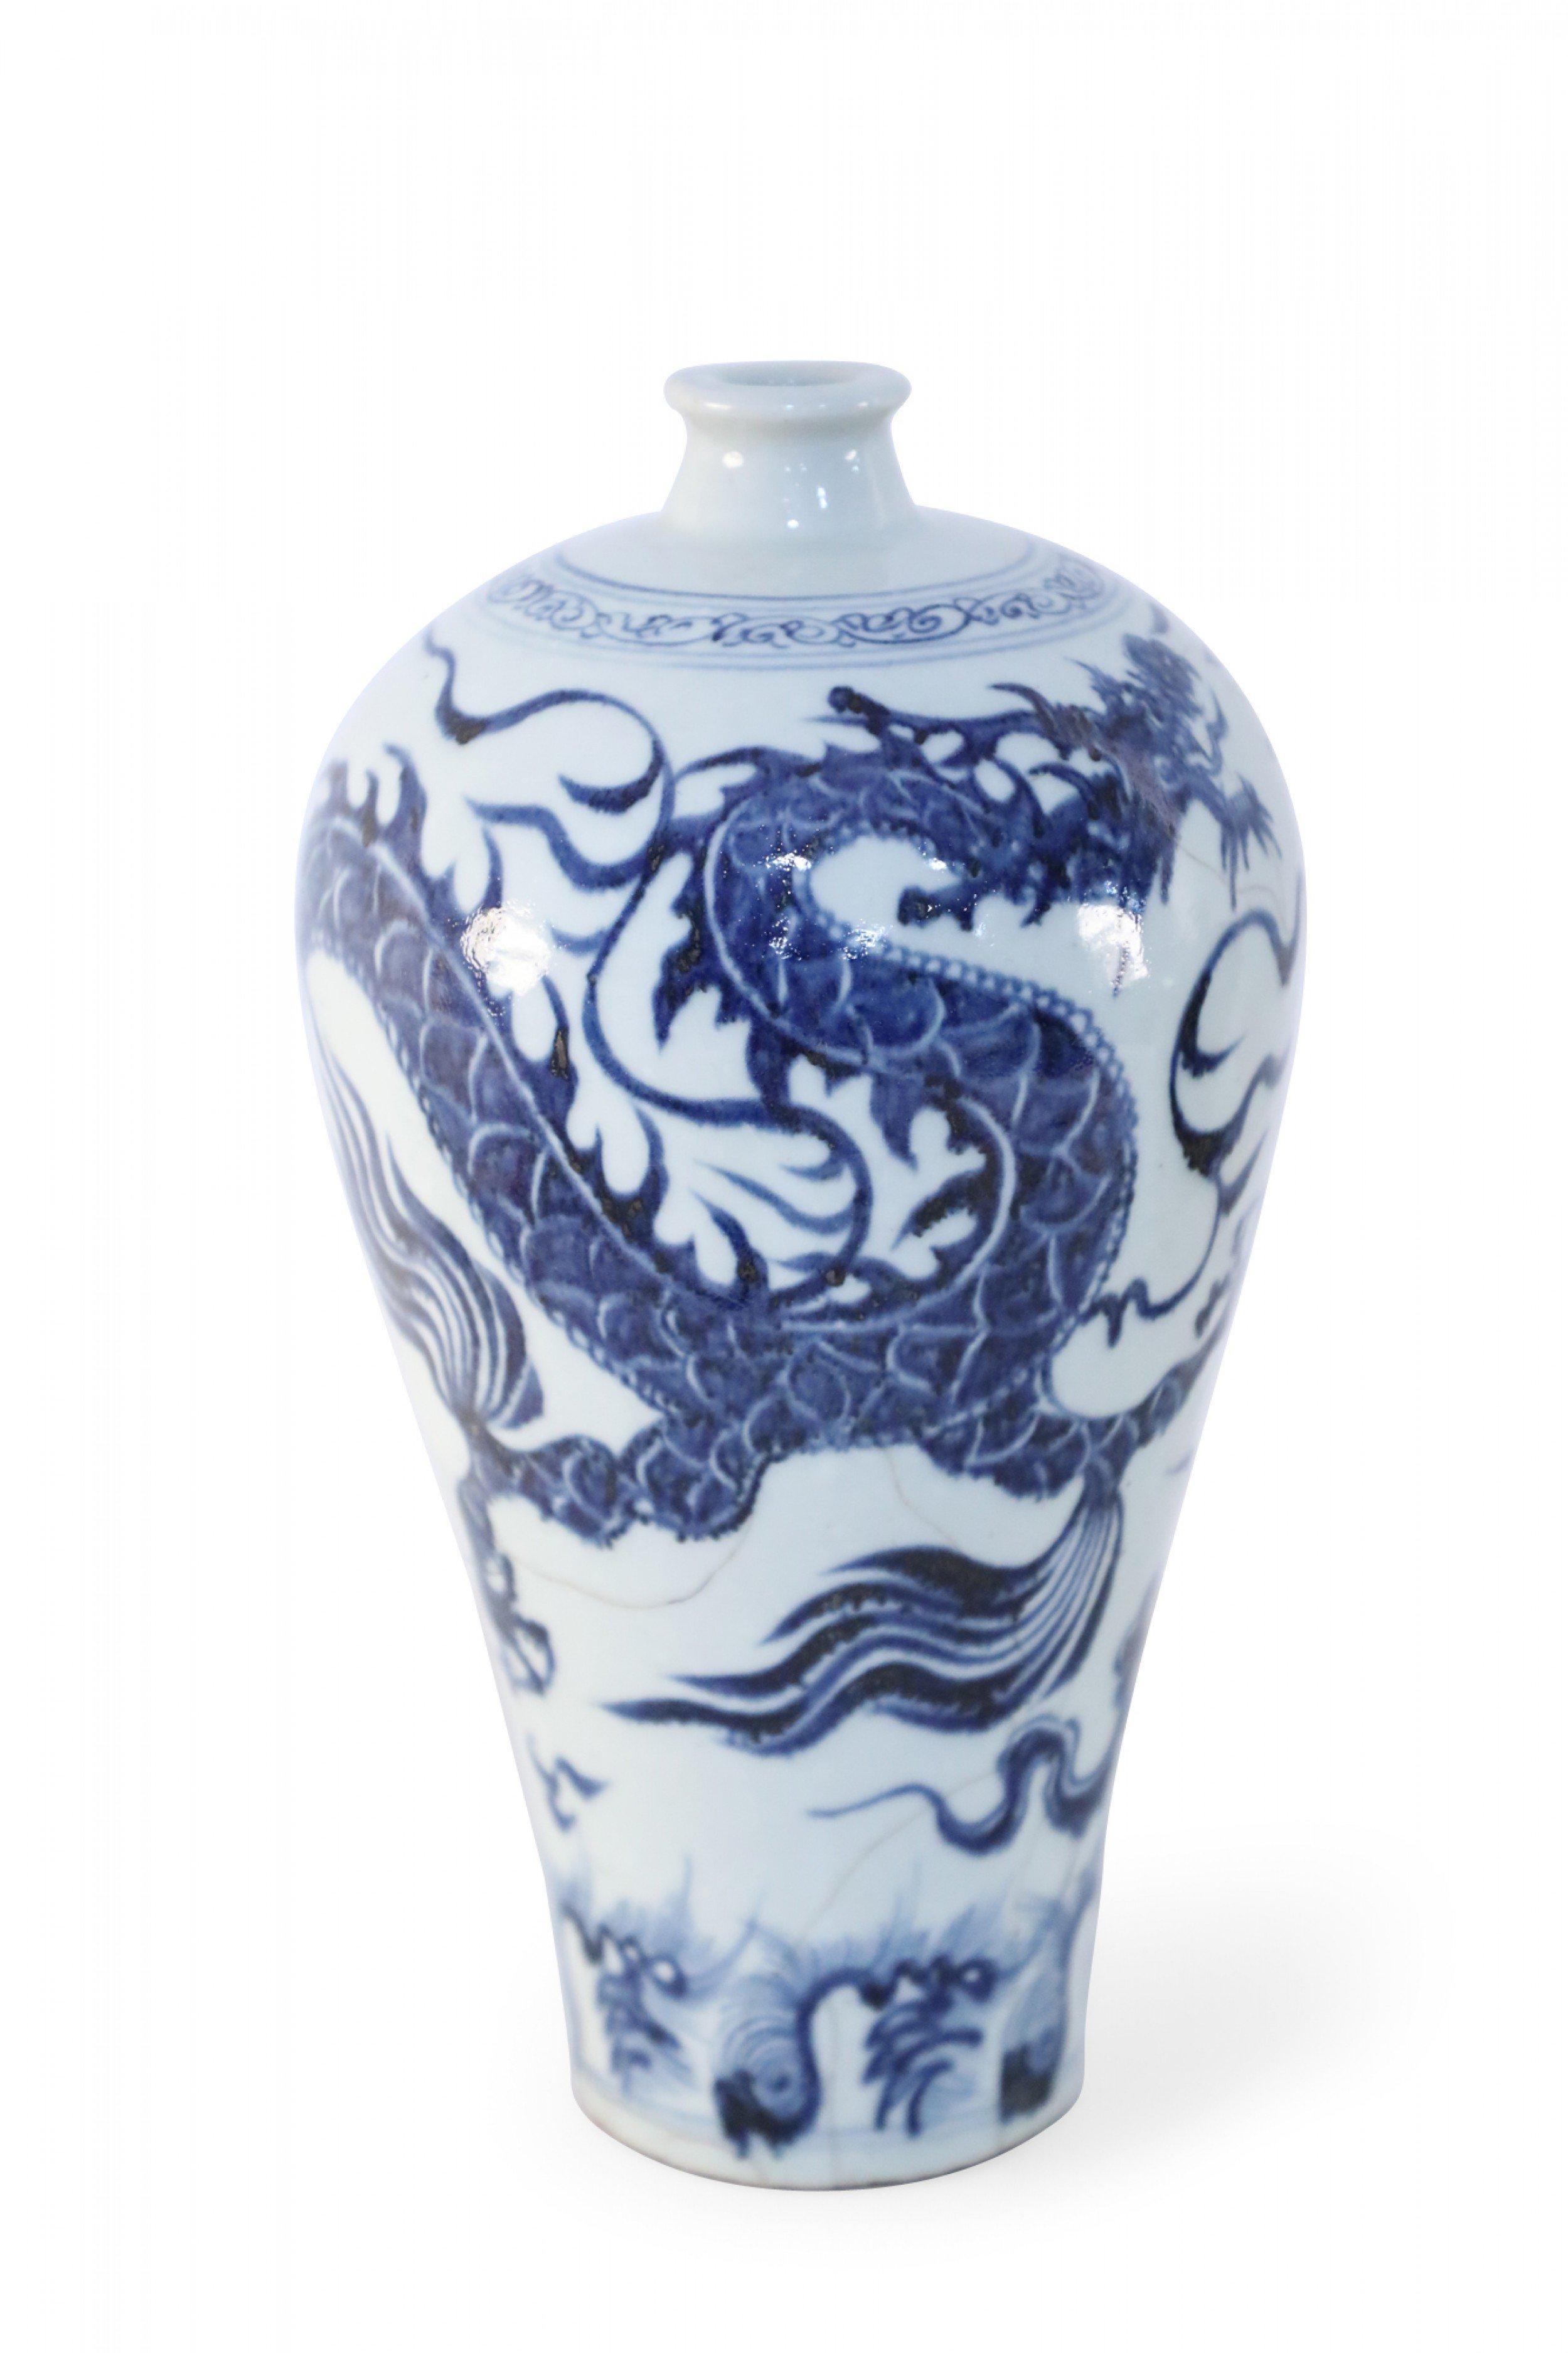 18th Century and Earlier Chinese White and Blue Dragon Design Porcelain Meiping Vase